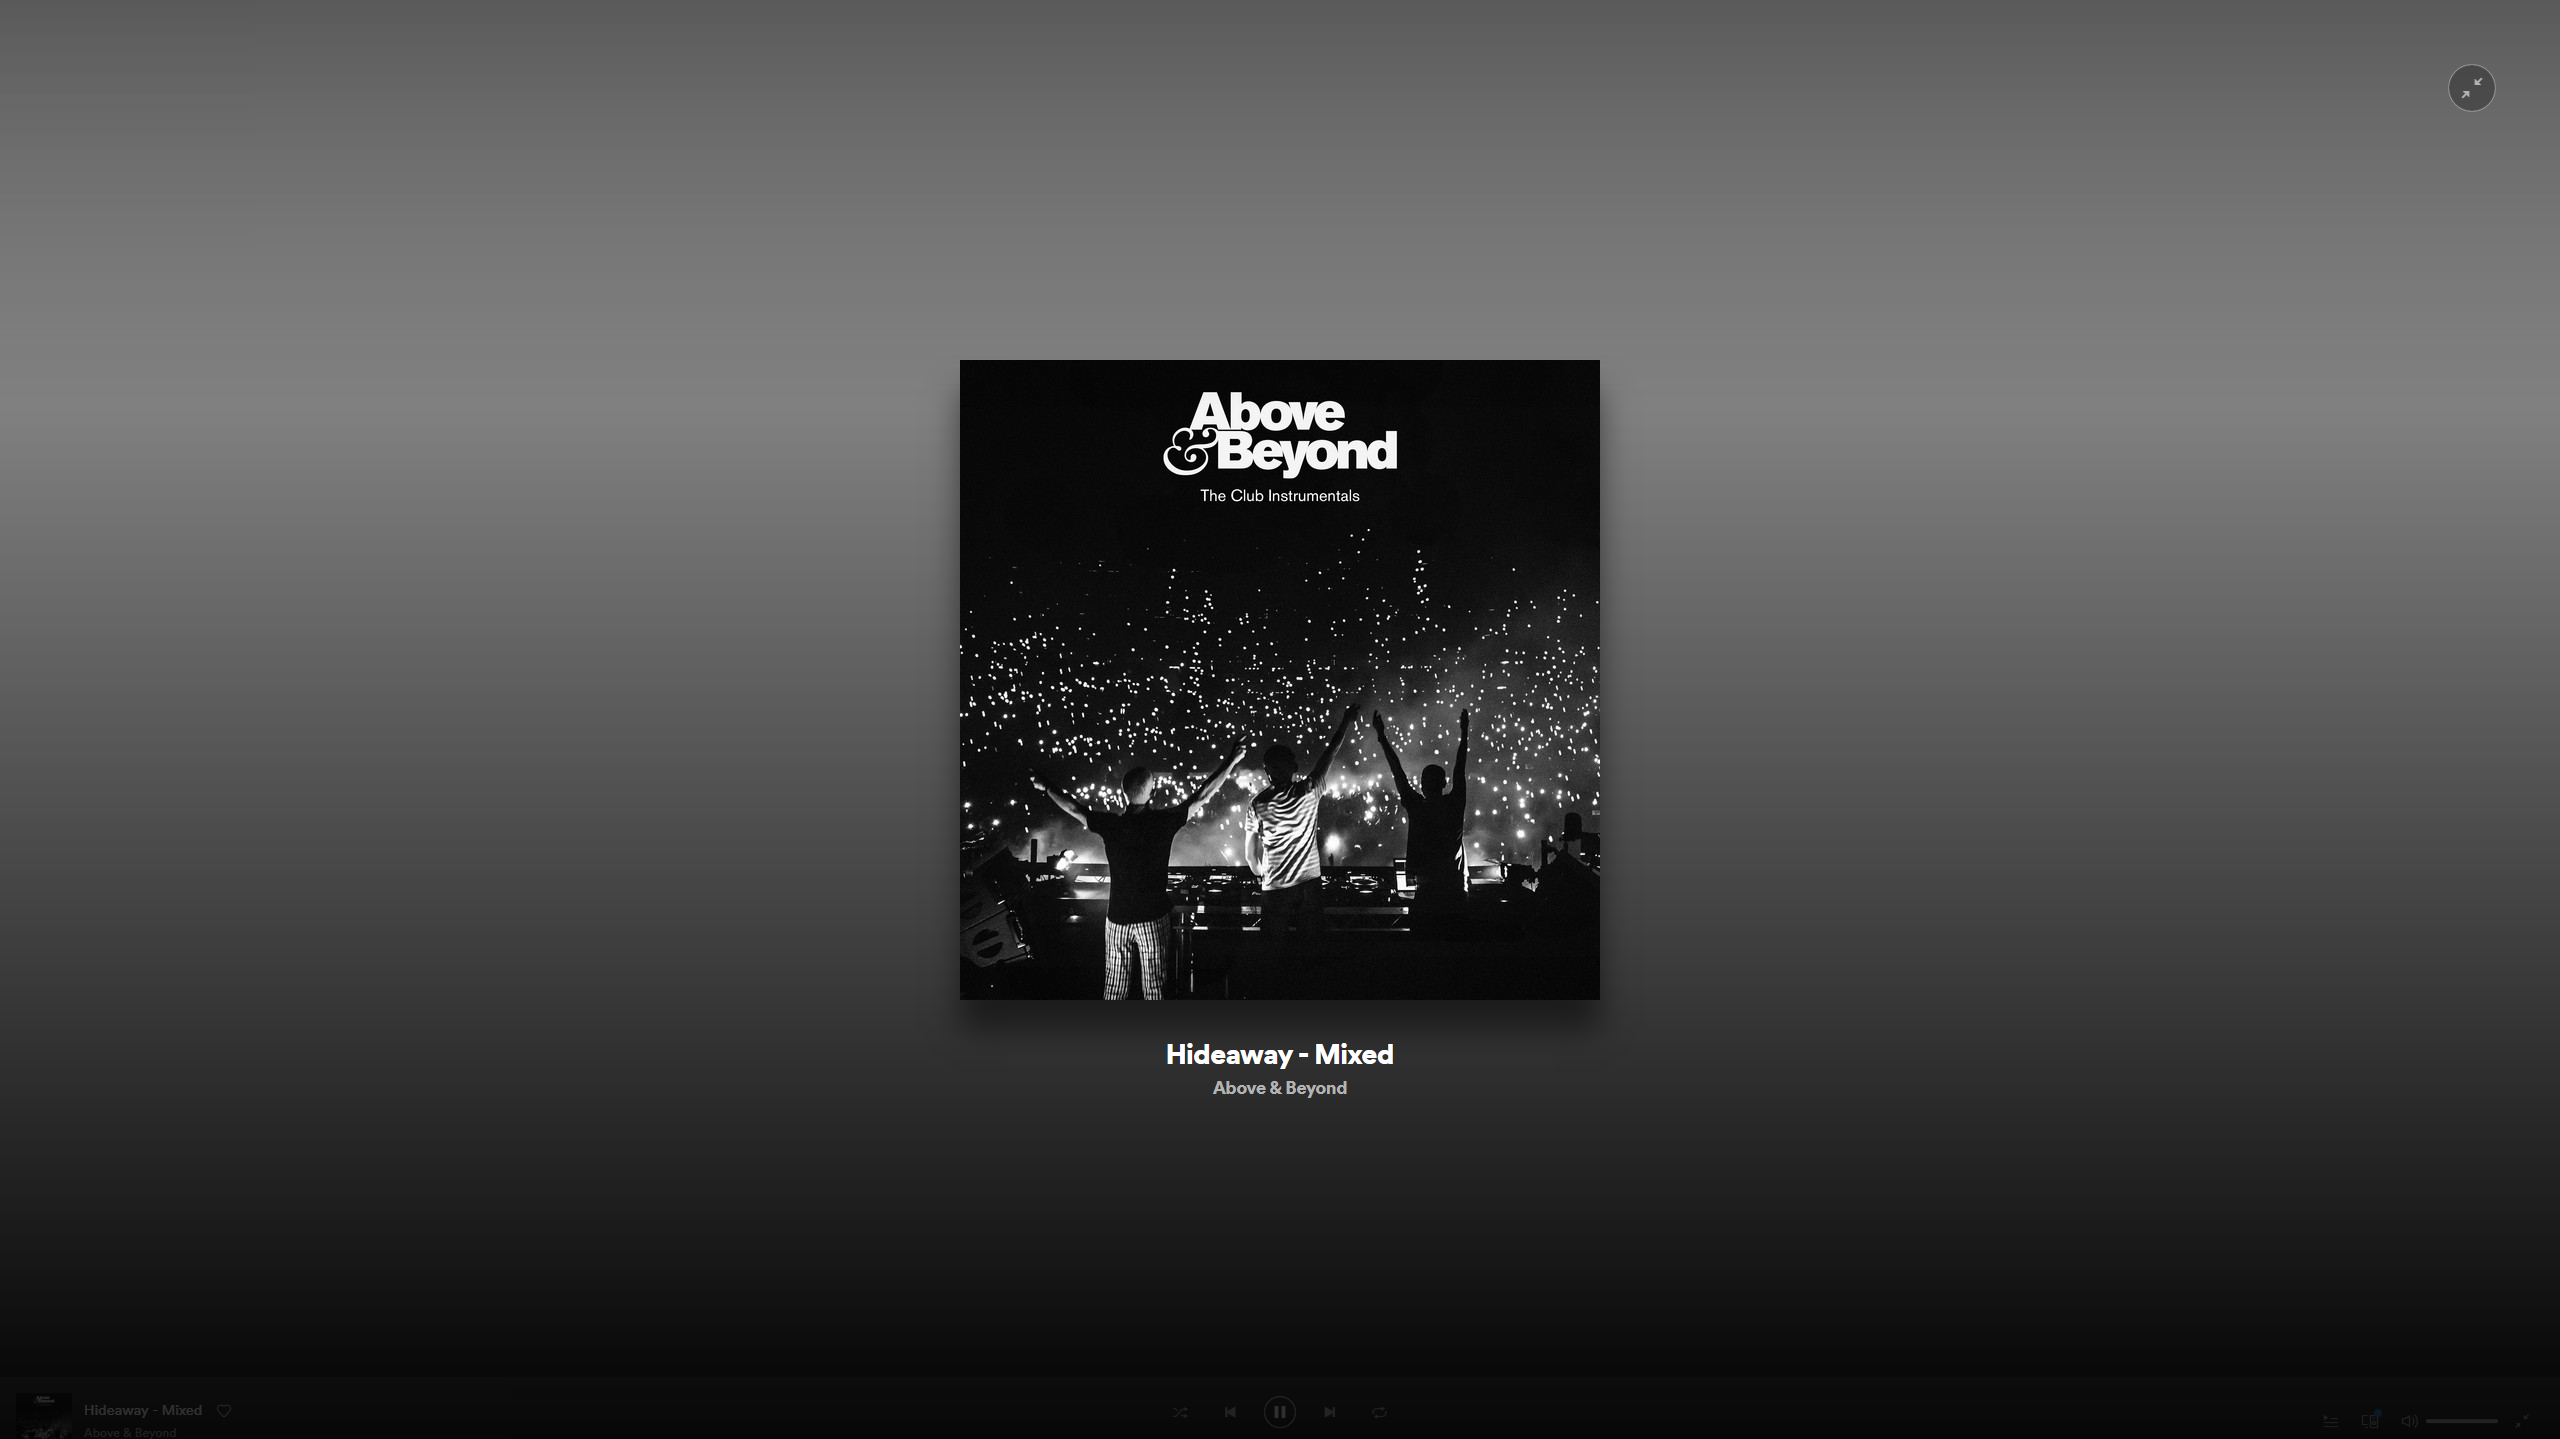 Desktop][Other] Option to maximize album cover in - The Spotify